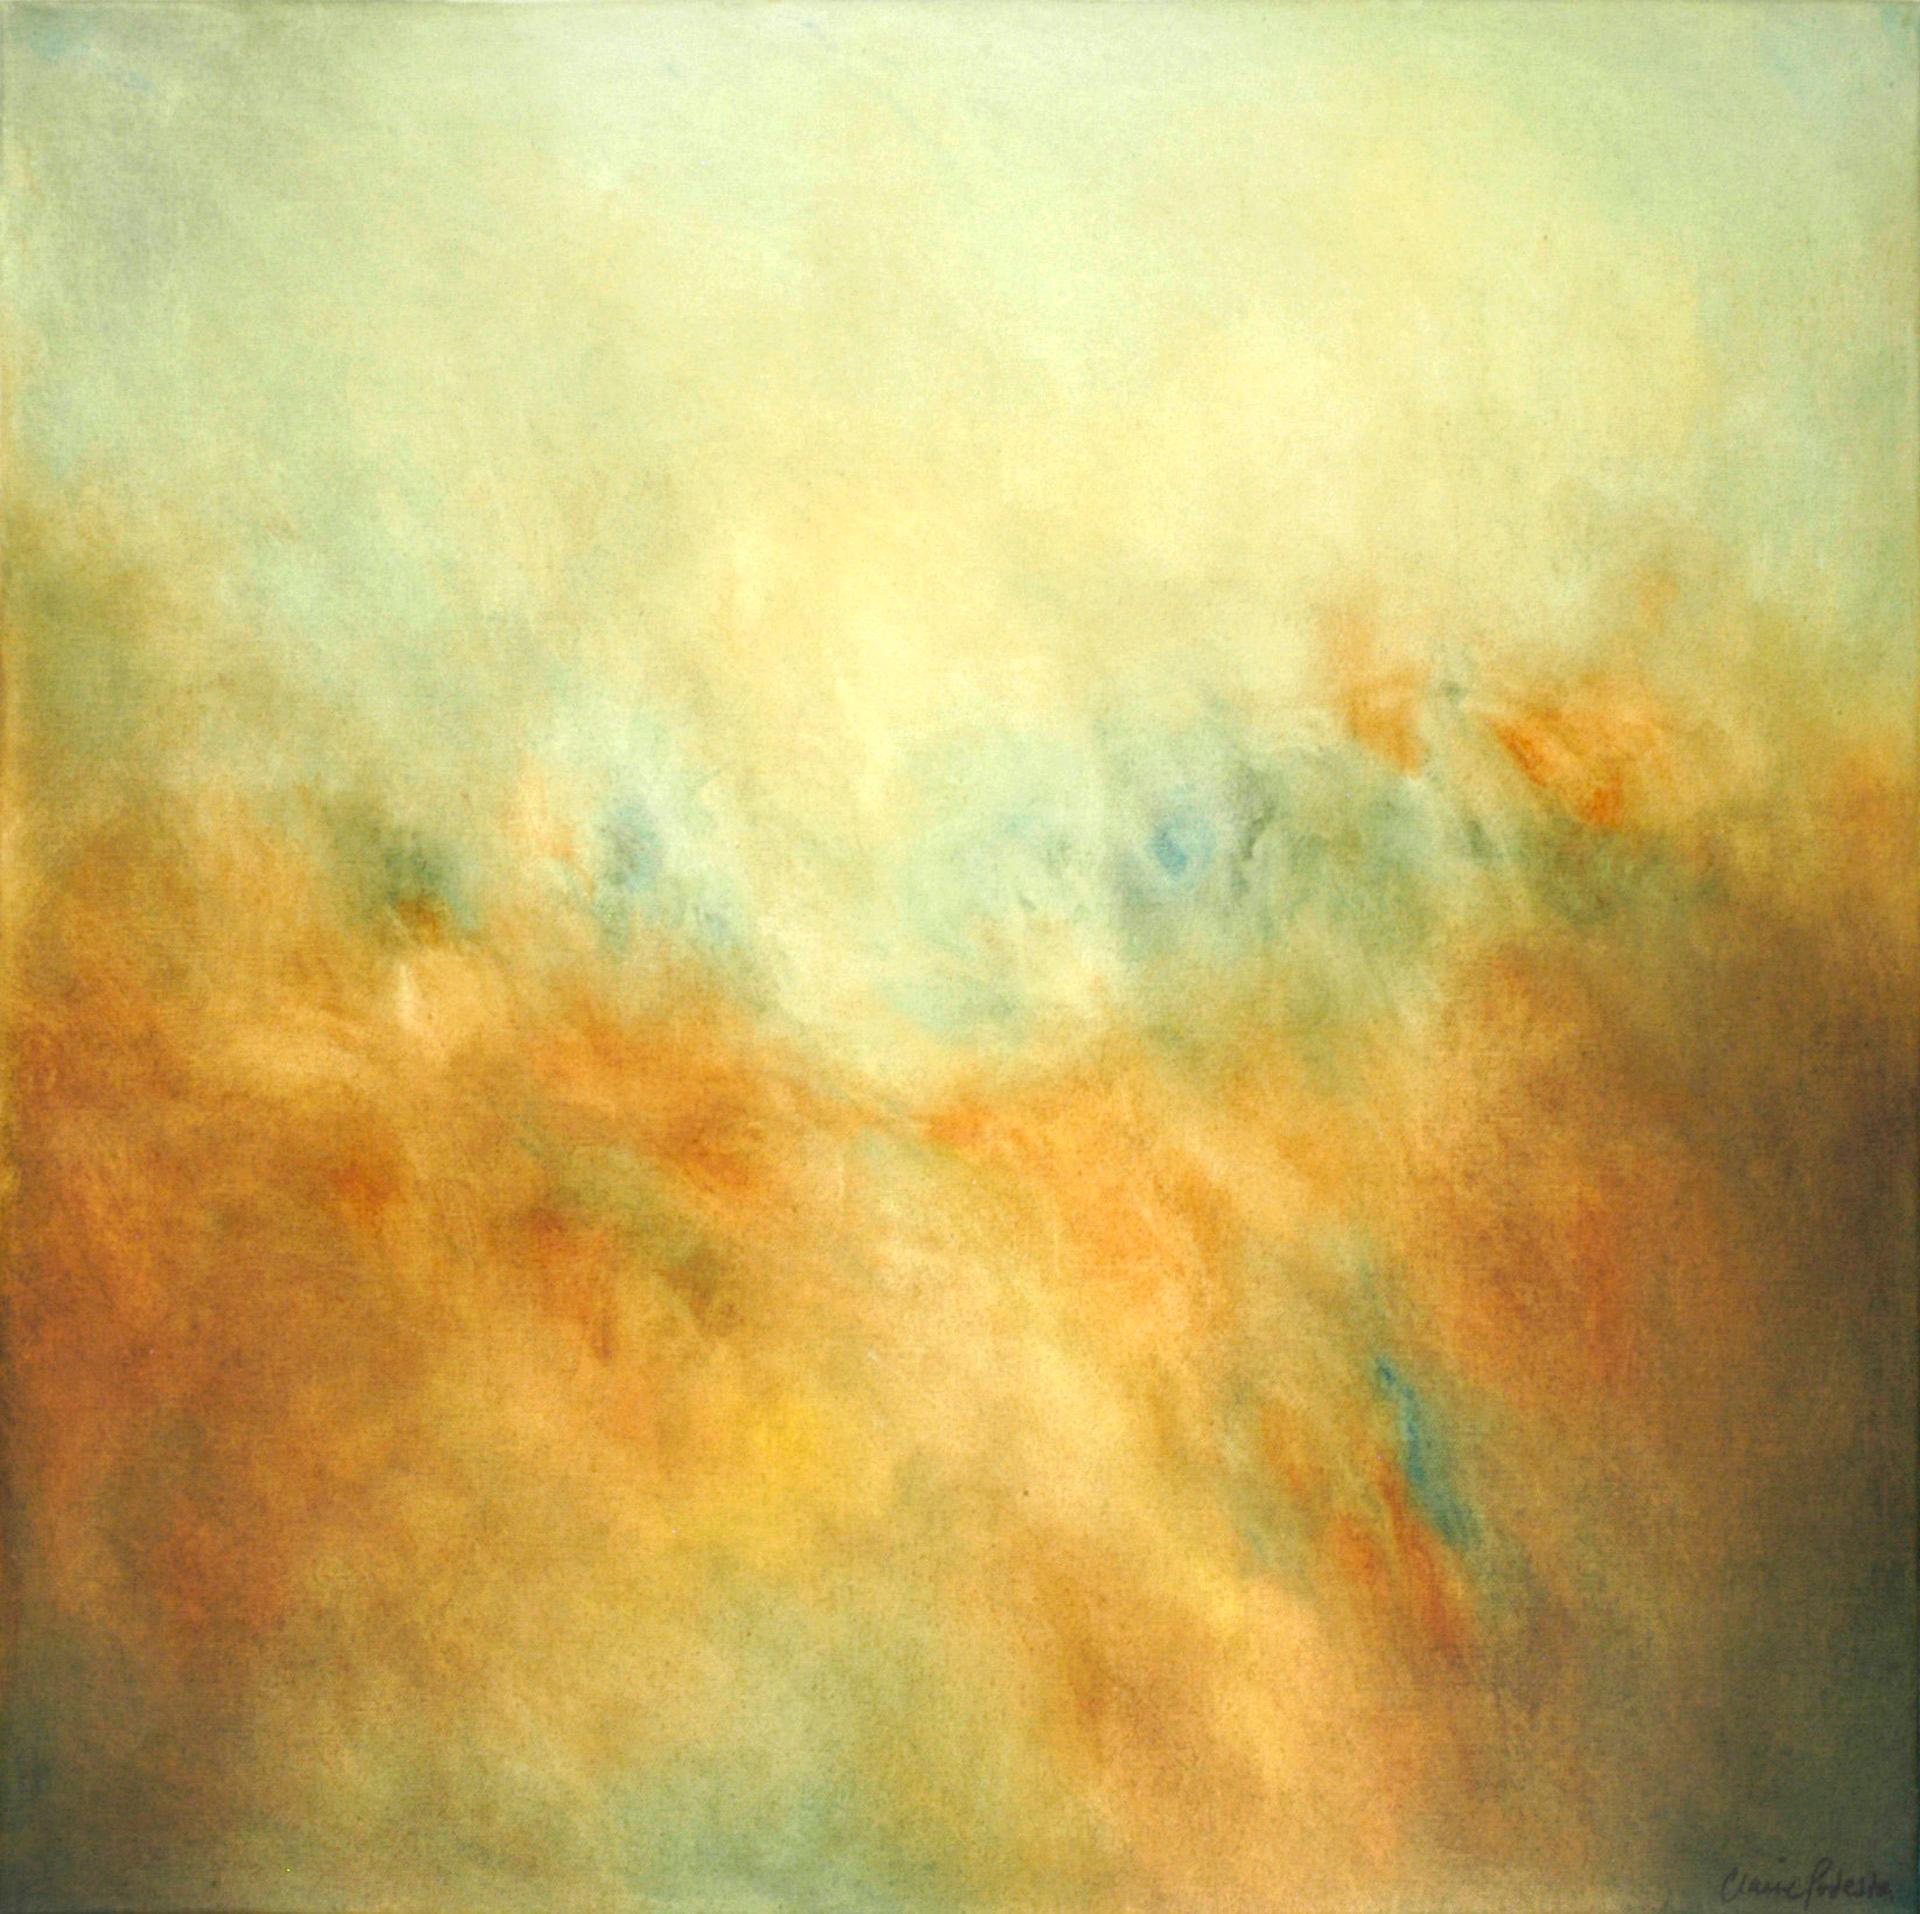 Claire Podesta Landscape Painting - Clare Podesta, Rolling On, Bright Abstract Landscapes, Romanticist Painting